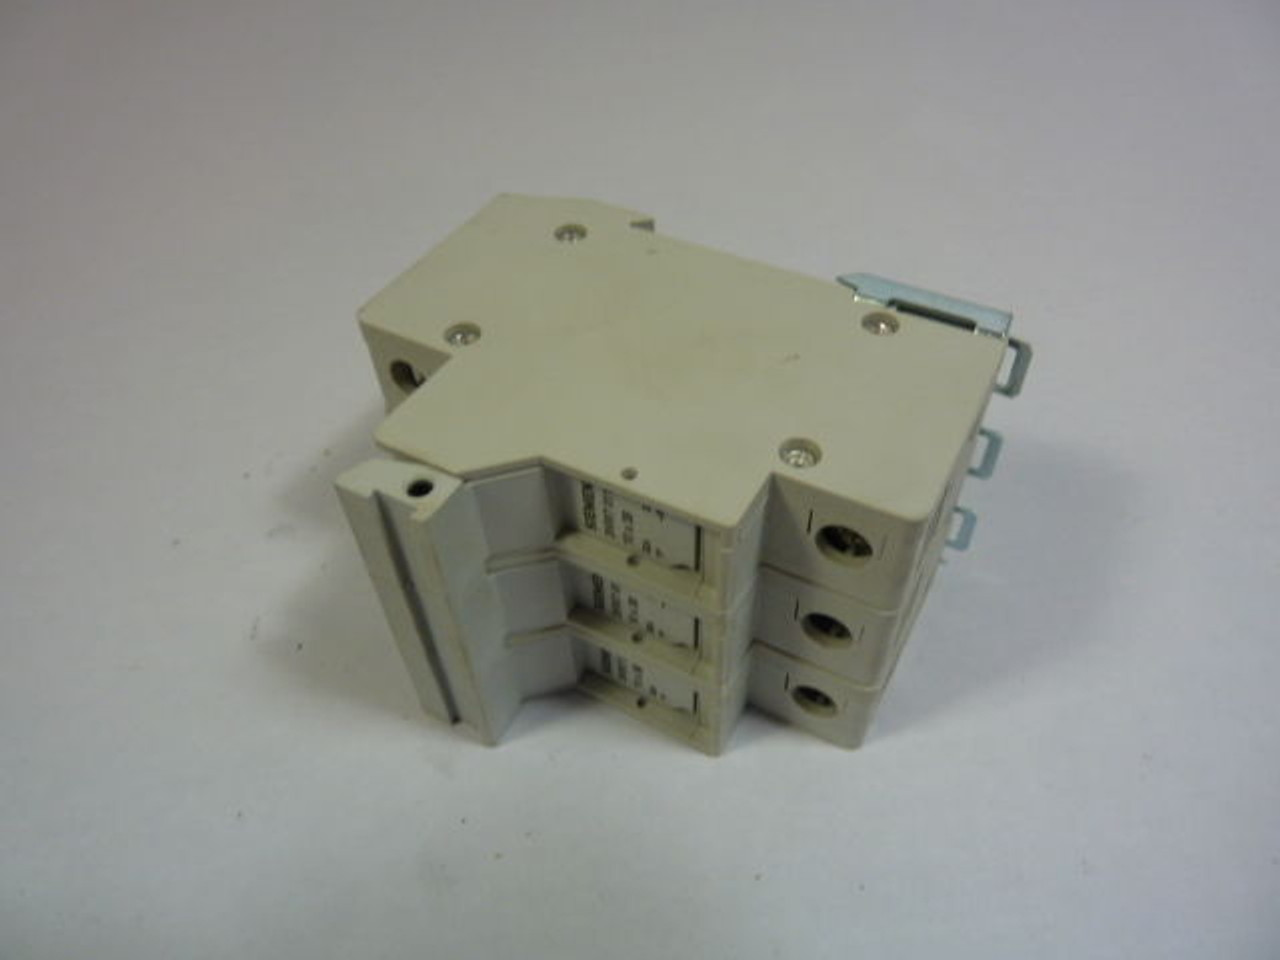 Siemens 3NW7011 Fuse Holder 30A 600V 3P USED